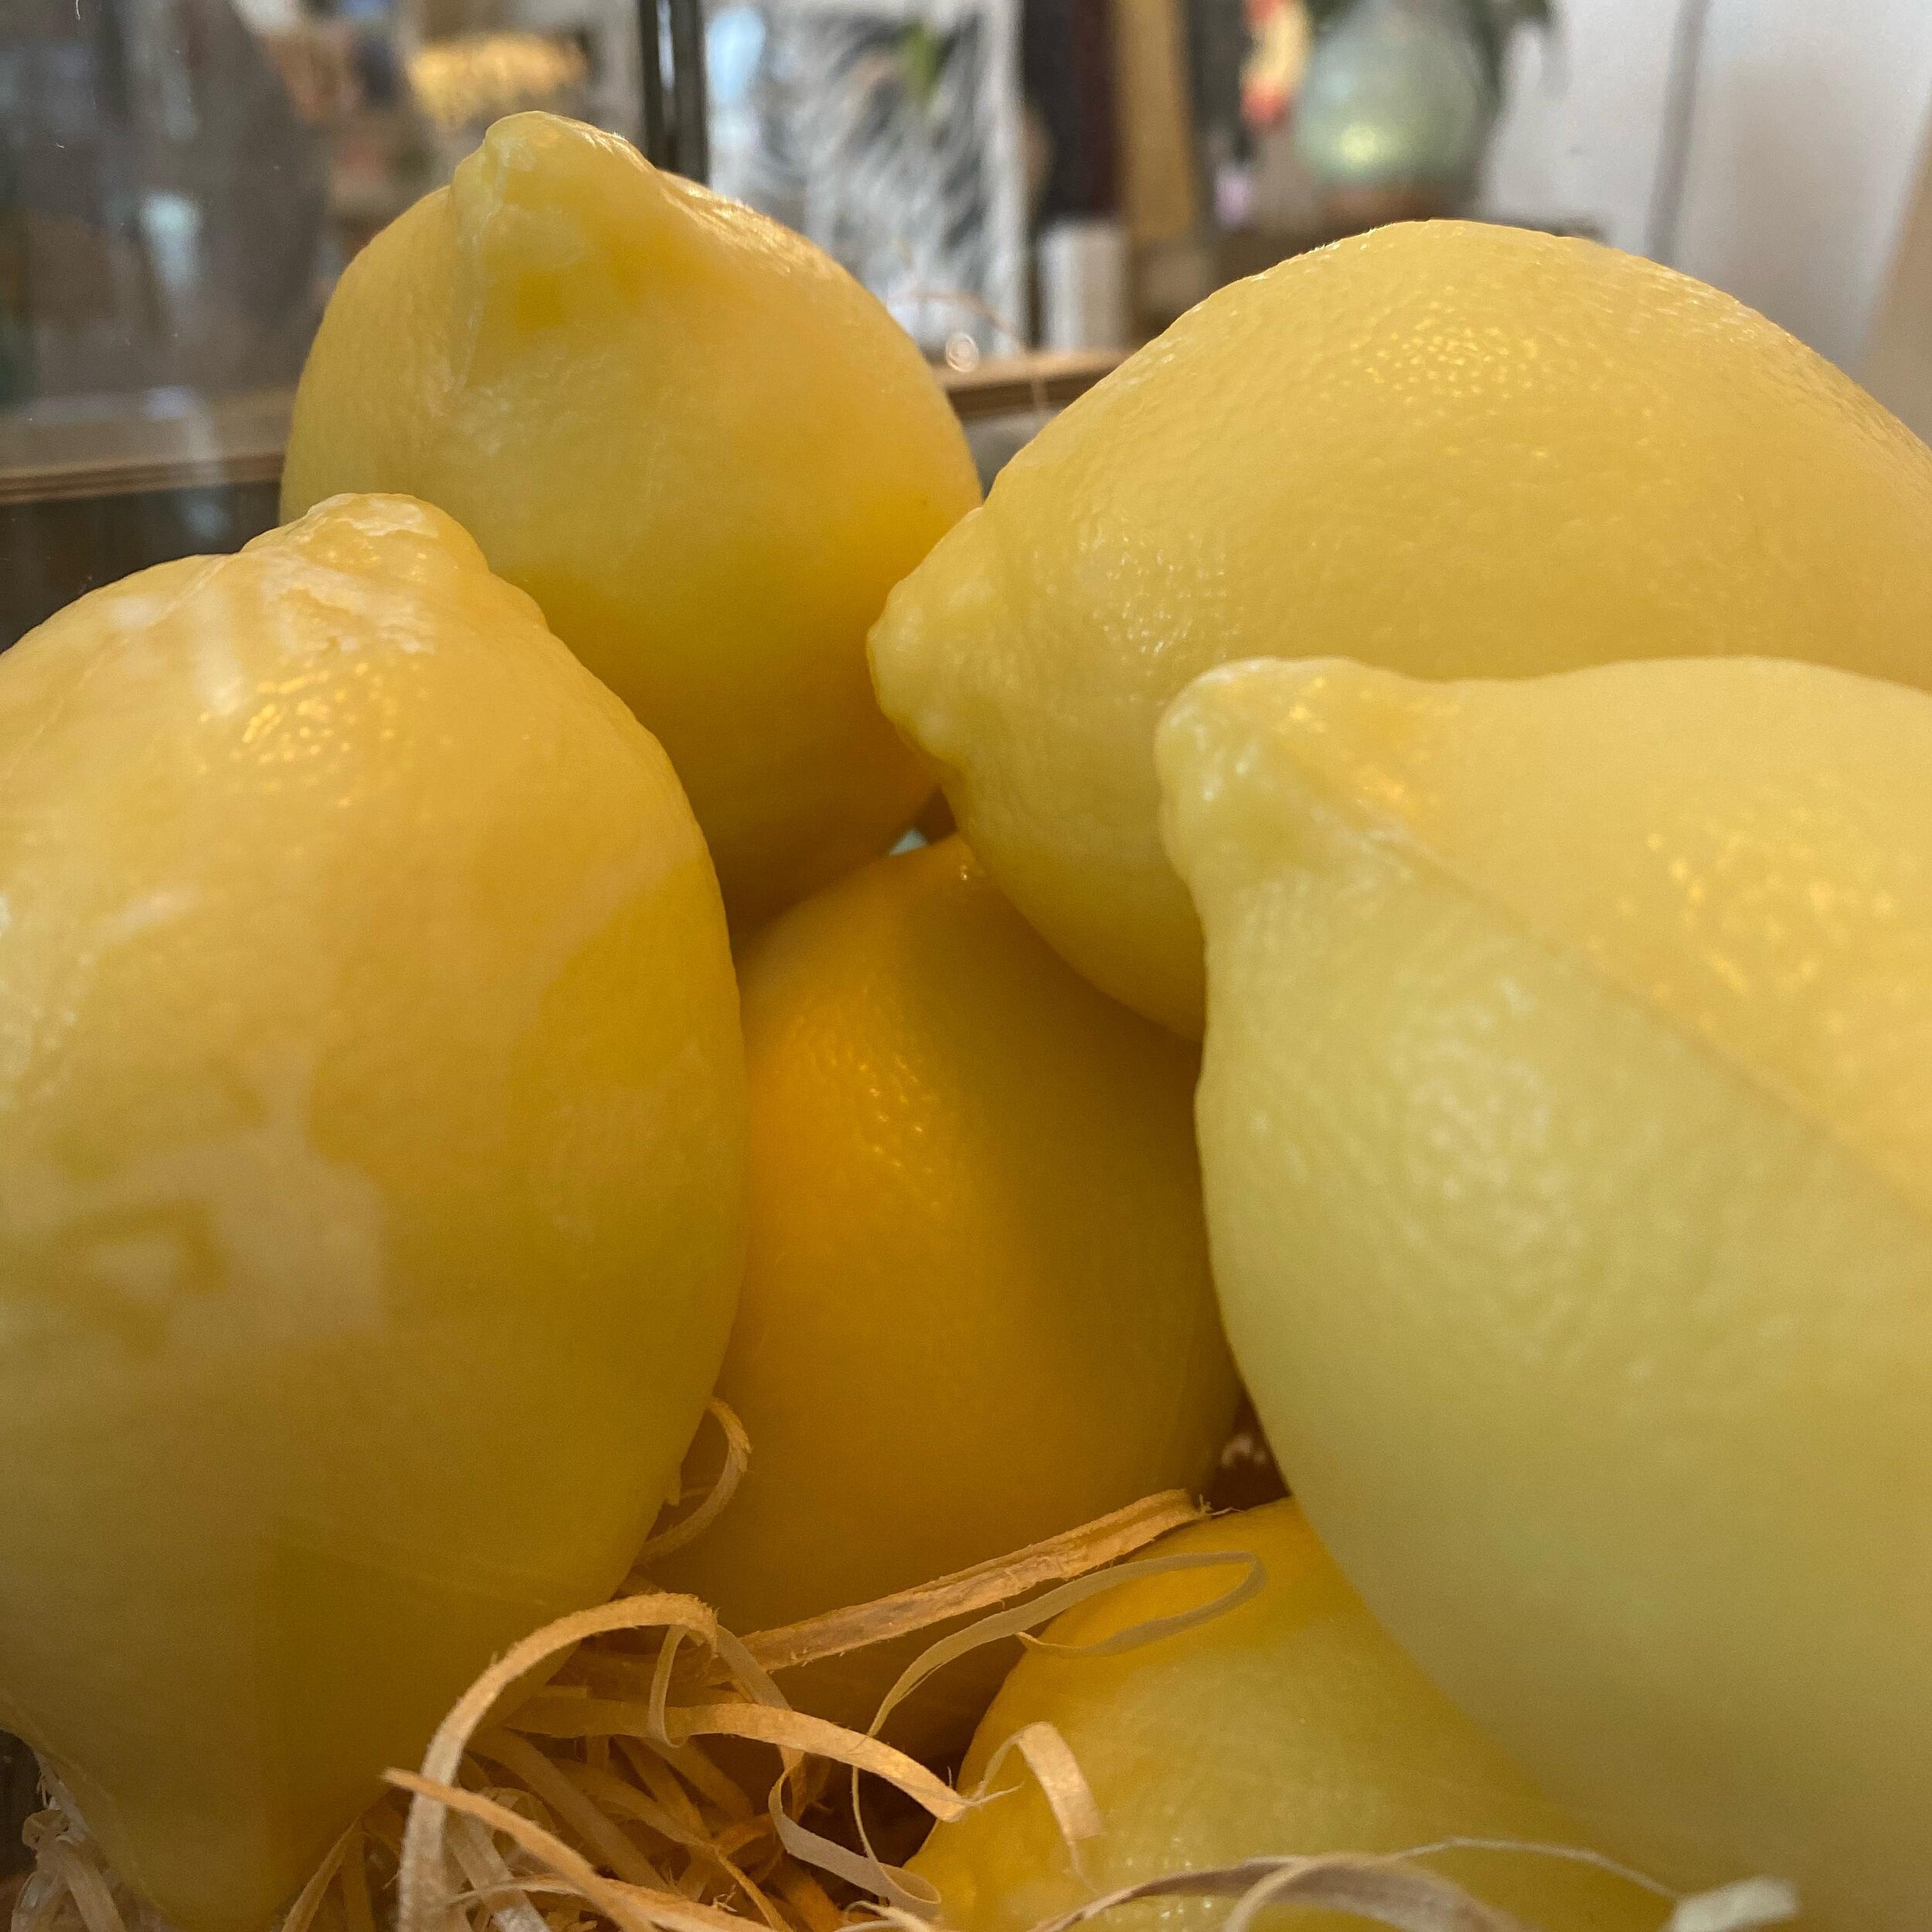 March Offer 🍋

Enjoy 20% off this gorgeous Lemon Soap this month (whilst stocks lasts!!)🧼

#thecandletreegloucester #thekandletree #lemon #lemonsoap #refreshingsoap #citrussoap #marchoffer